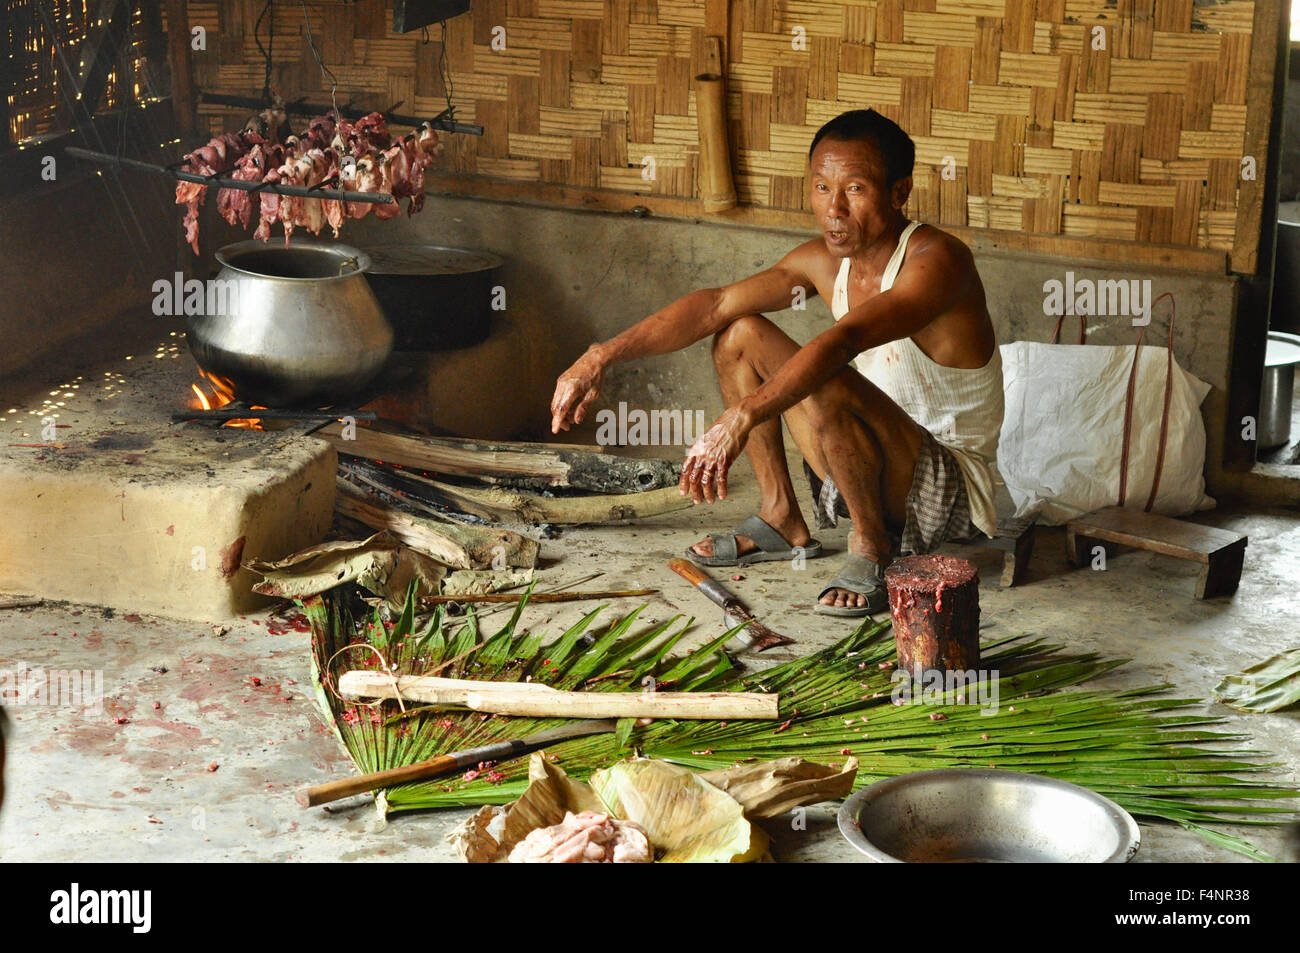 Nagaland, India - March 2012: Man cooking meat in Nagaland, remote region of India. Documentary editorial. Stock Photo